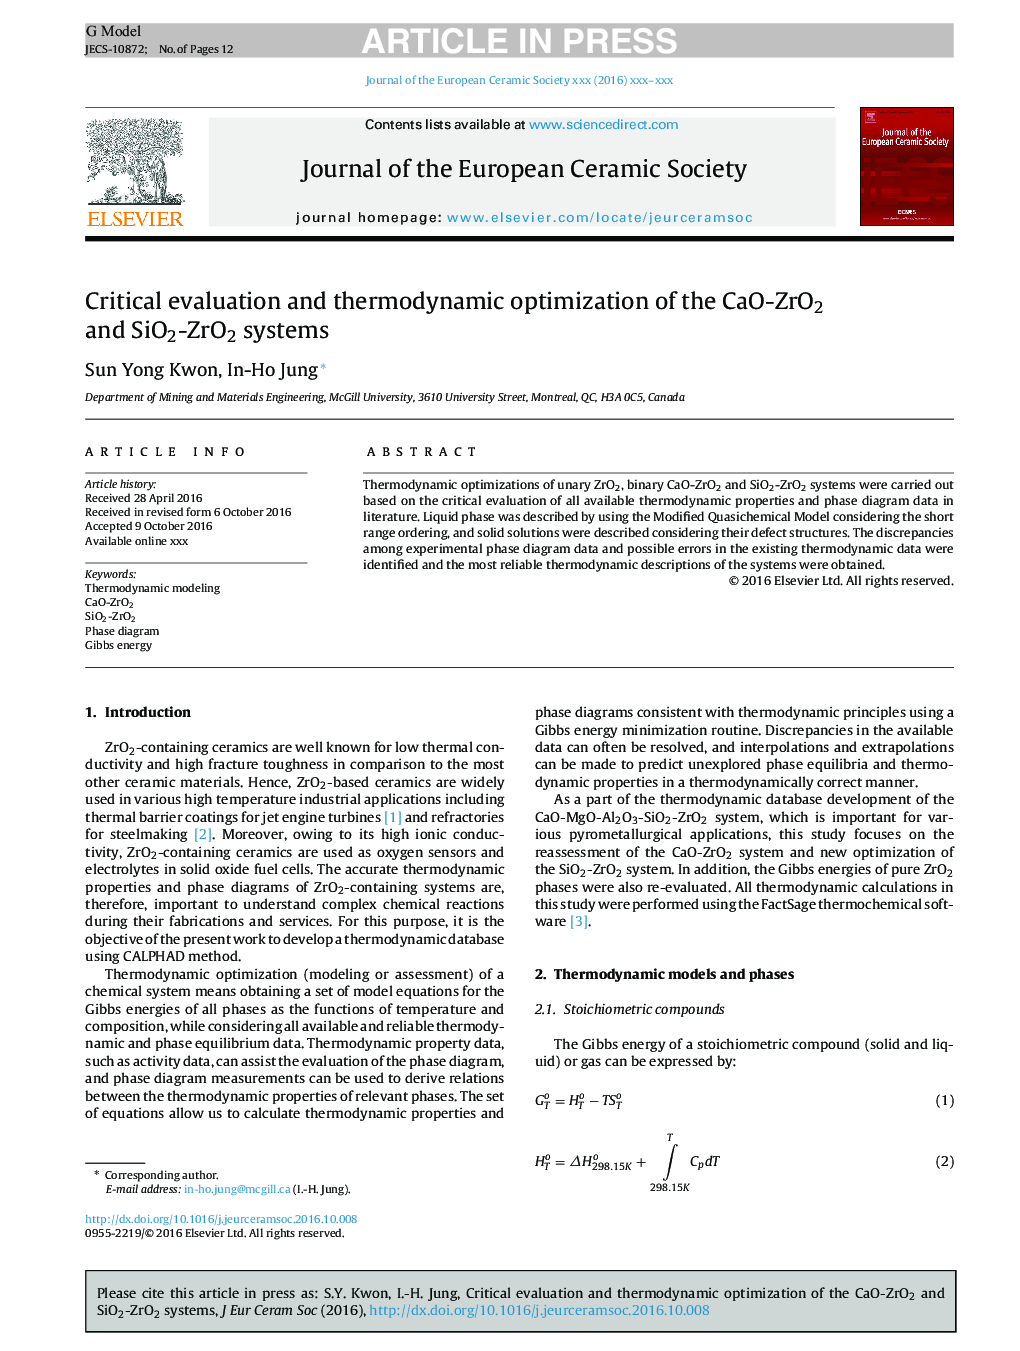 Critical evaluation and thermodynamic optimization of the CaO-ZrO2 and SiO2-ZrO2 systems